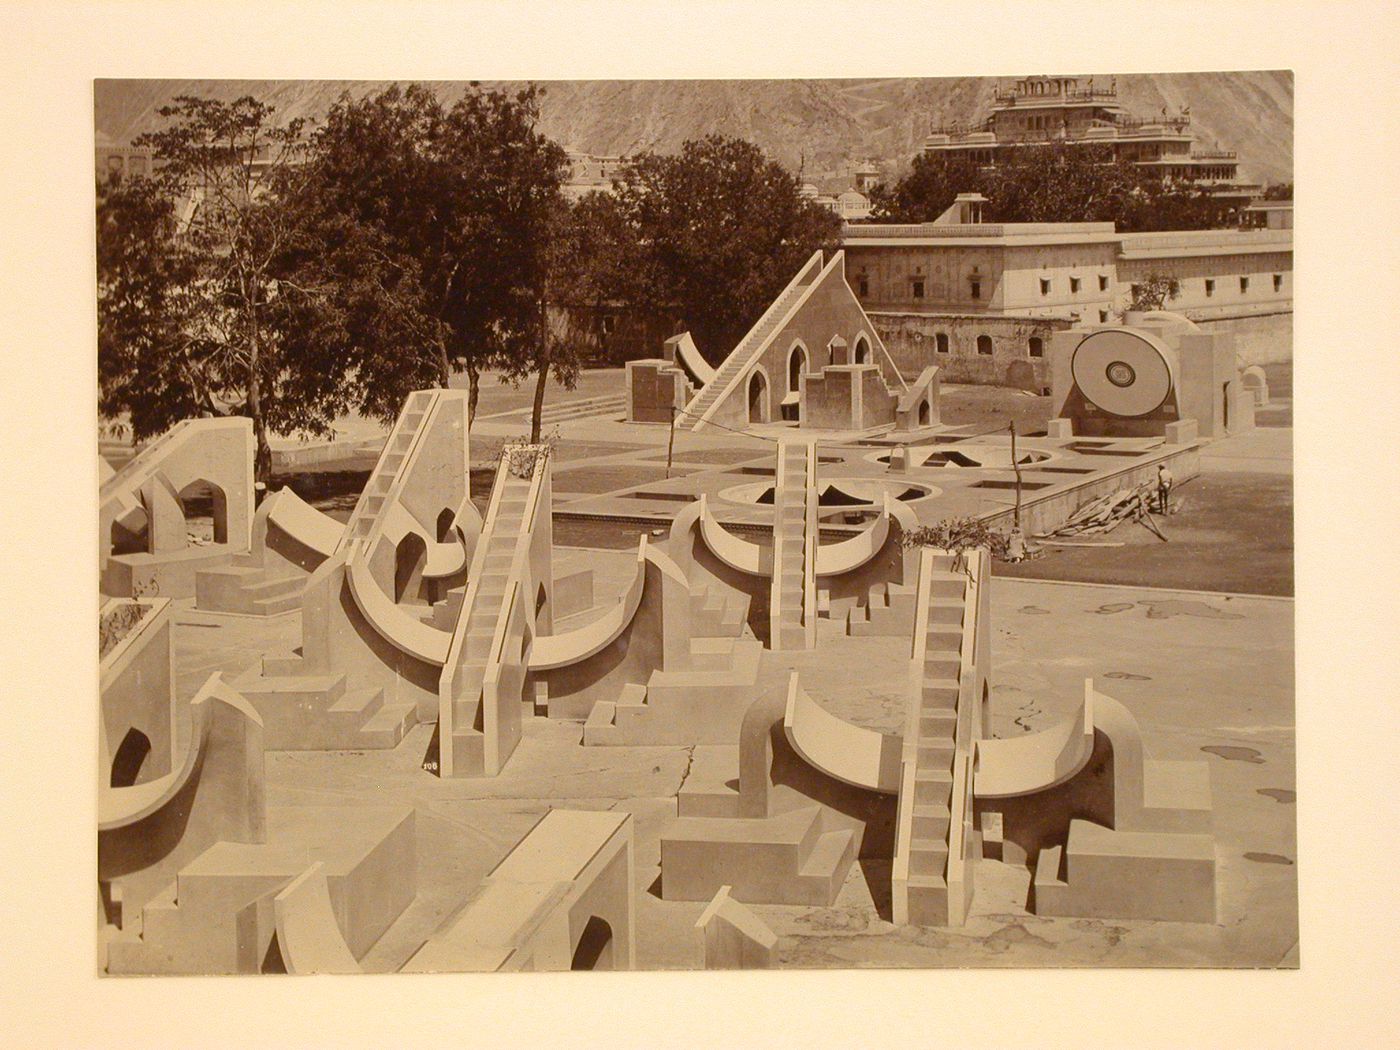 View of astronomical instruments, including the Rasivalaya Yantra, Jaipur Observatory, Jeypore (now Jaipur), India